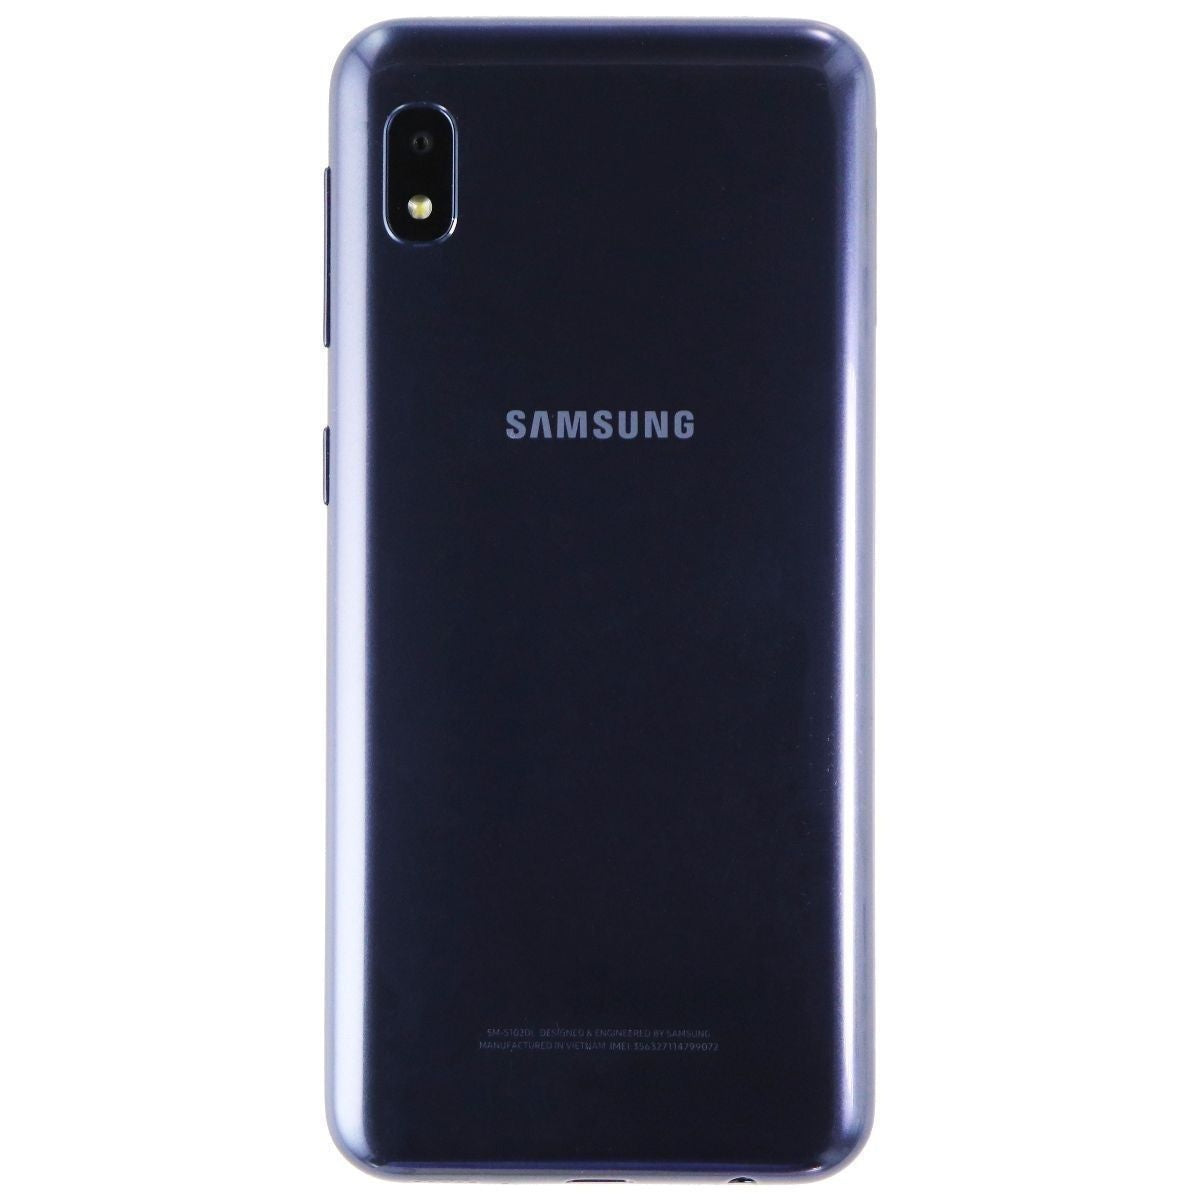 Samsung Galaxy A10e (5.8-in) SM-S102DL (Tracfone Only) - 32GB / Black Cell Phones & Smartphones Samsung    - Simple Cell Bulk Wholesale Pricing - USA Seller